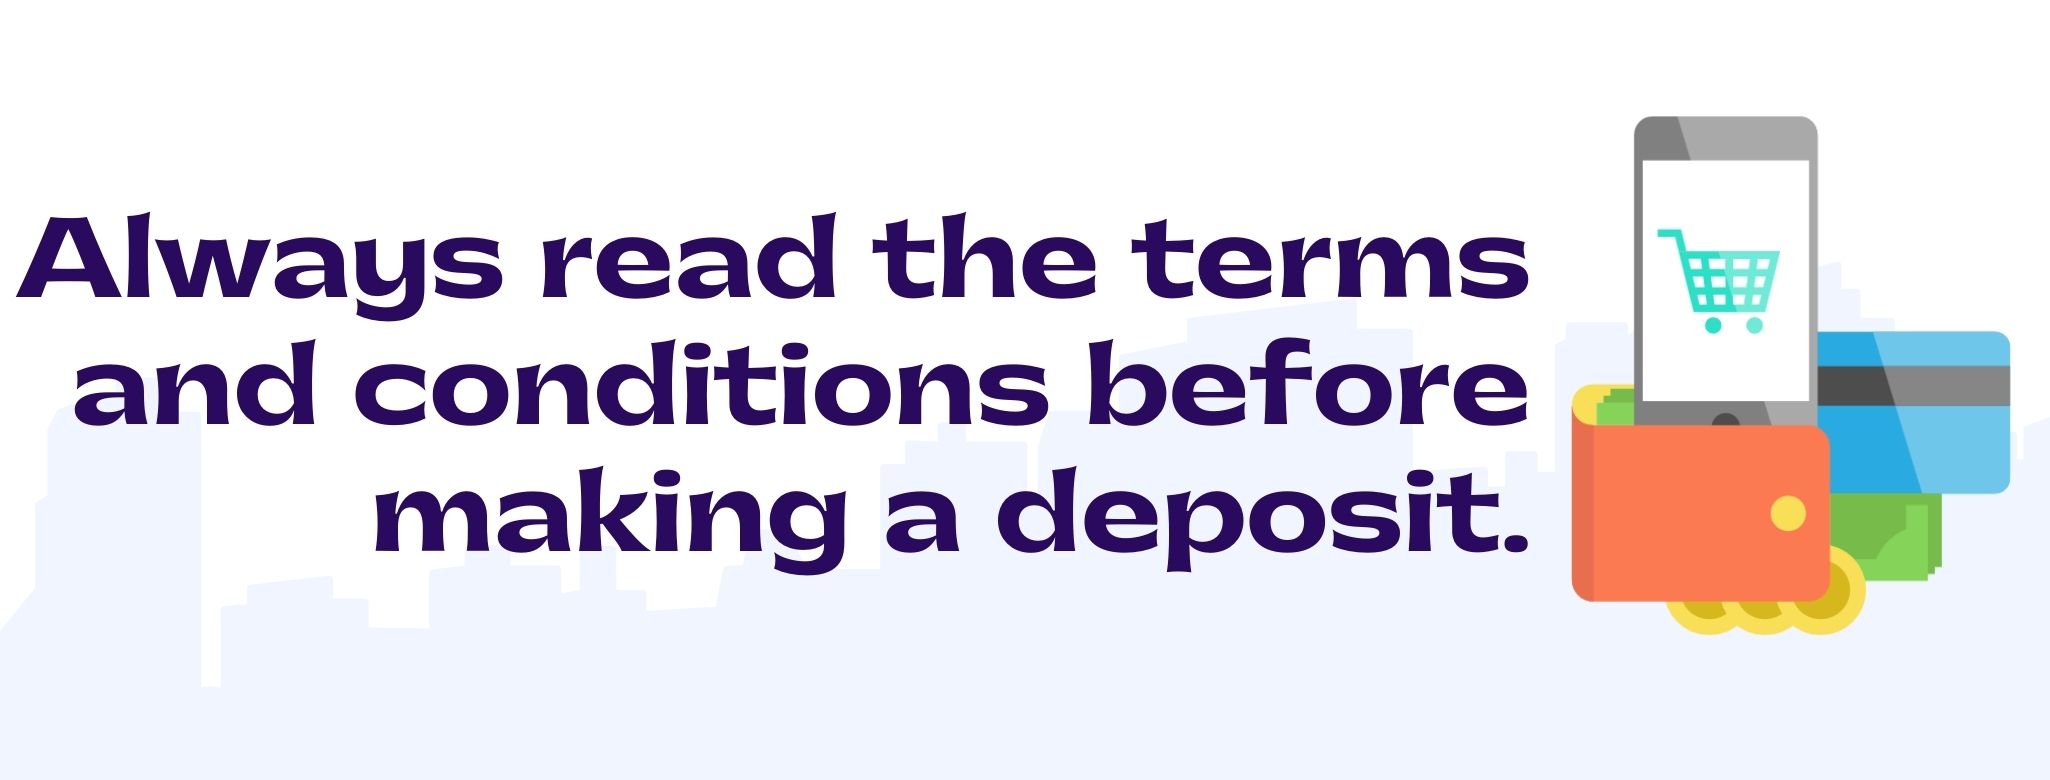 always-read-terms-and-conditions-before-you-deposit